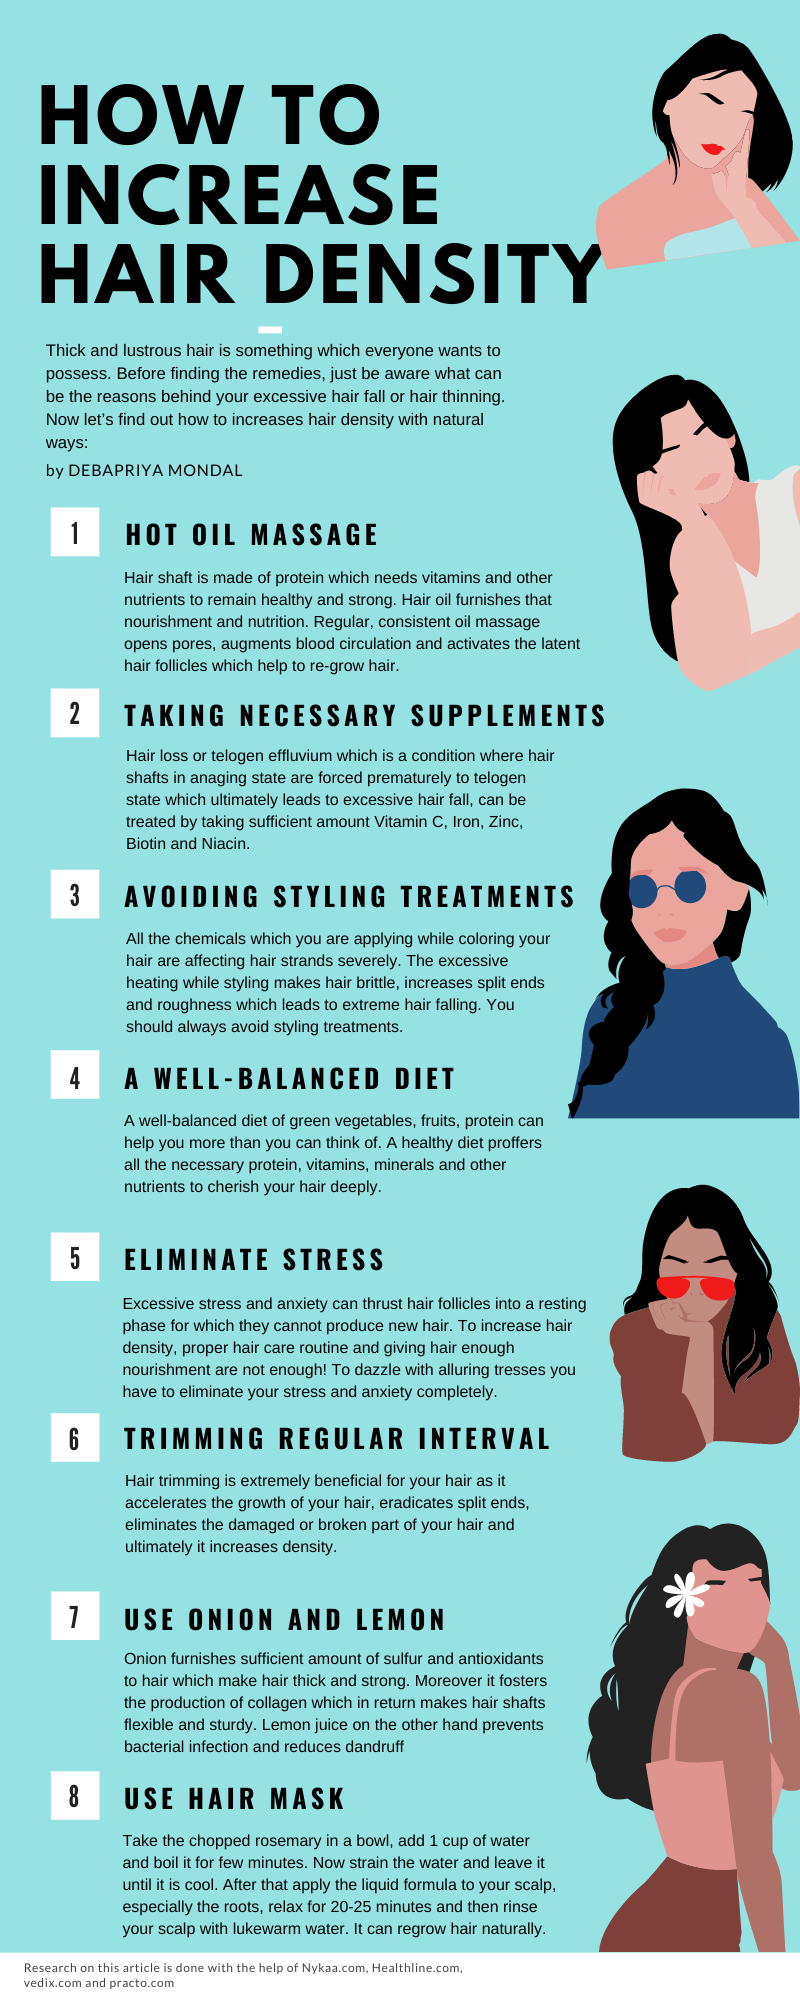 How to Increase Hair Density infographic